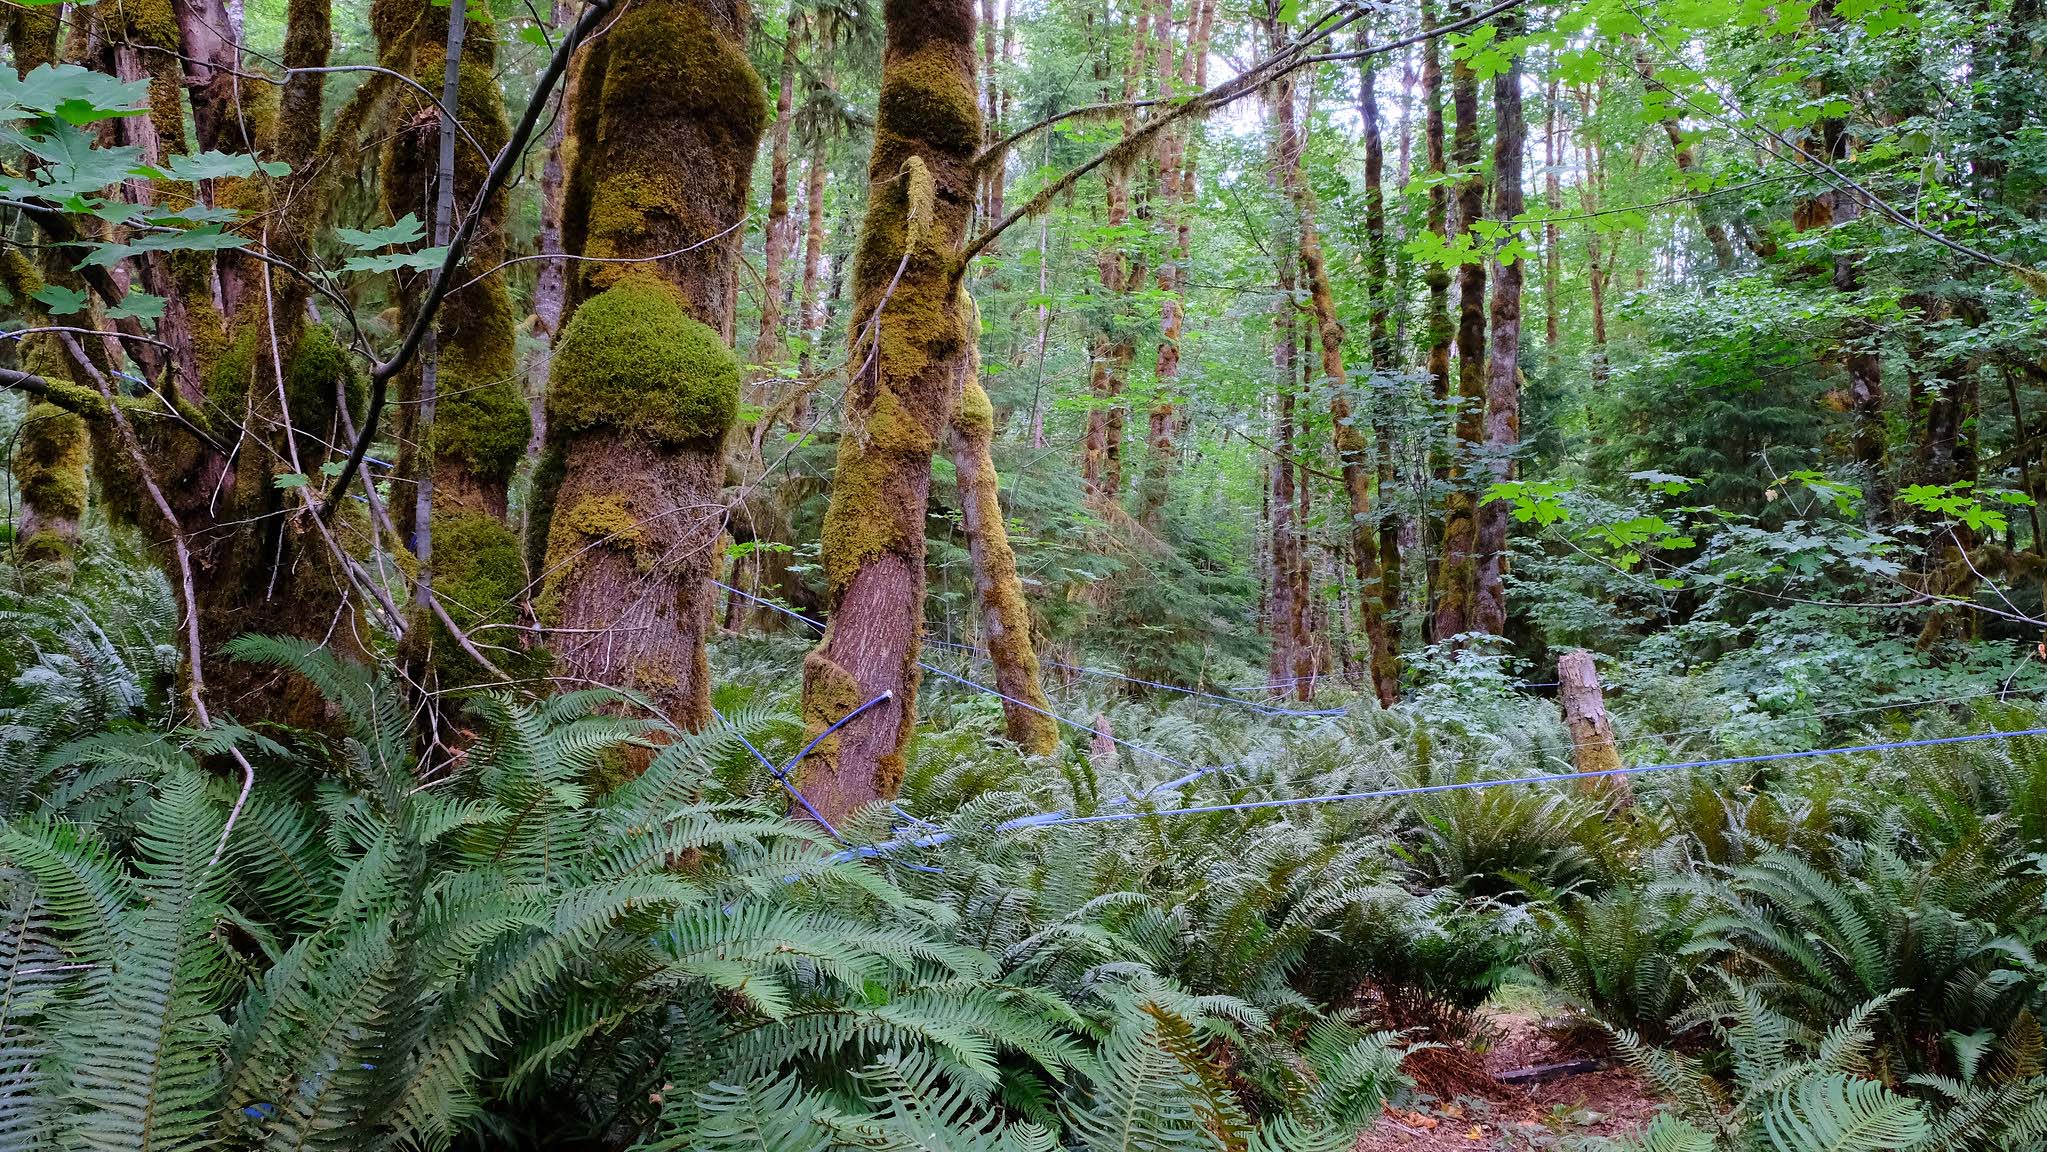 Forest, moss-covered trees, and ferns on the forest floor